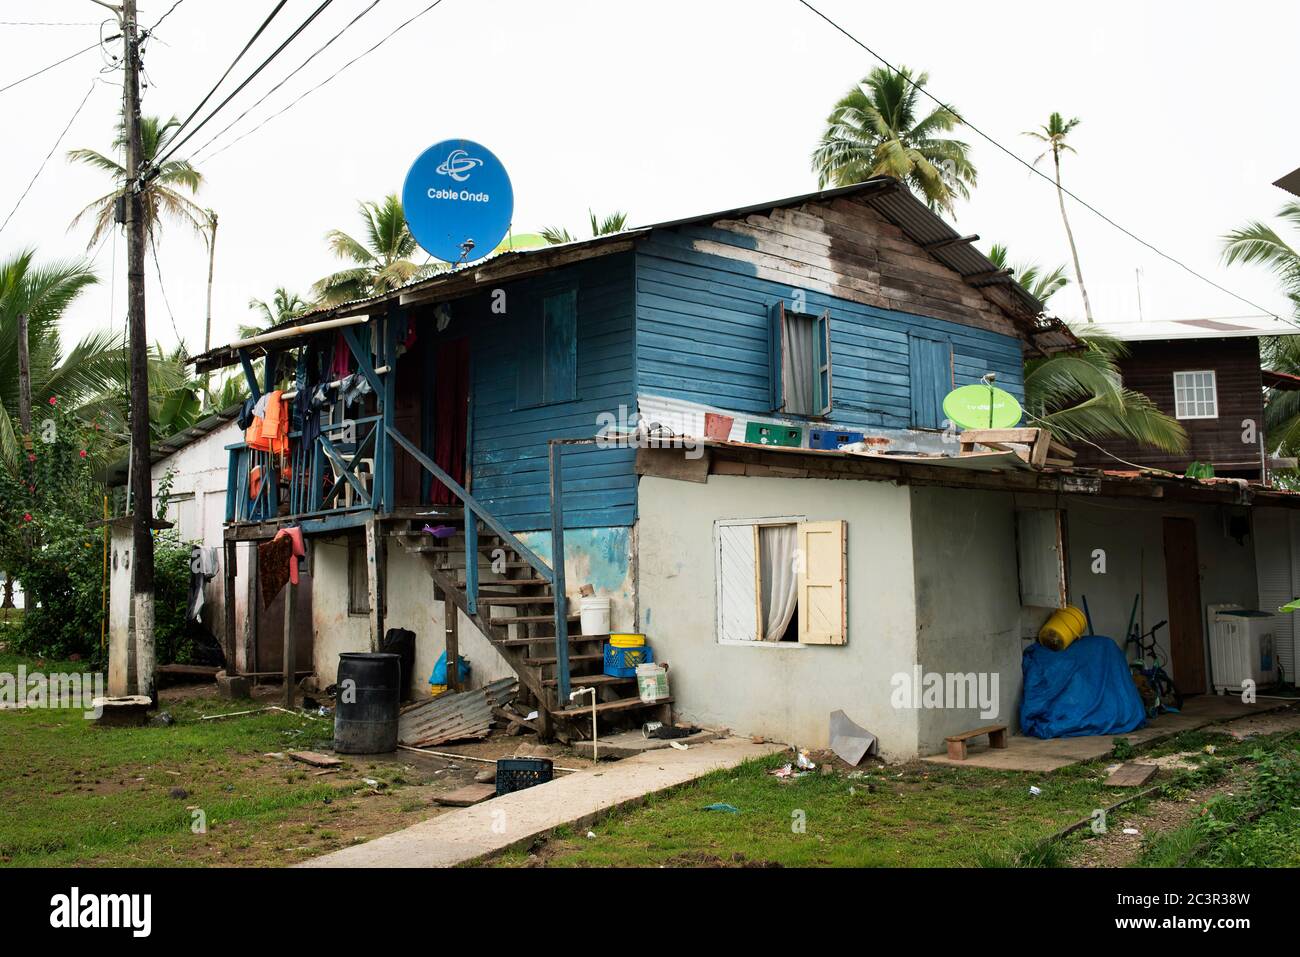 A Caribbean, wooden house with corrugated tin roofing. Isla Bastimentos, Bocas del Toro Province, Panama, Central America Stock Photo